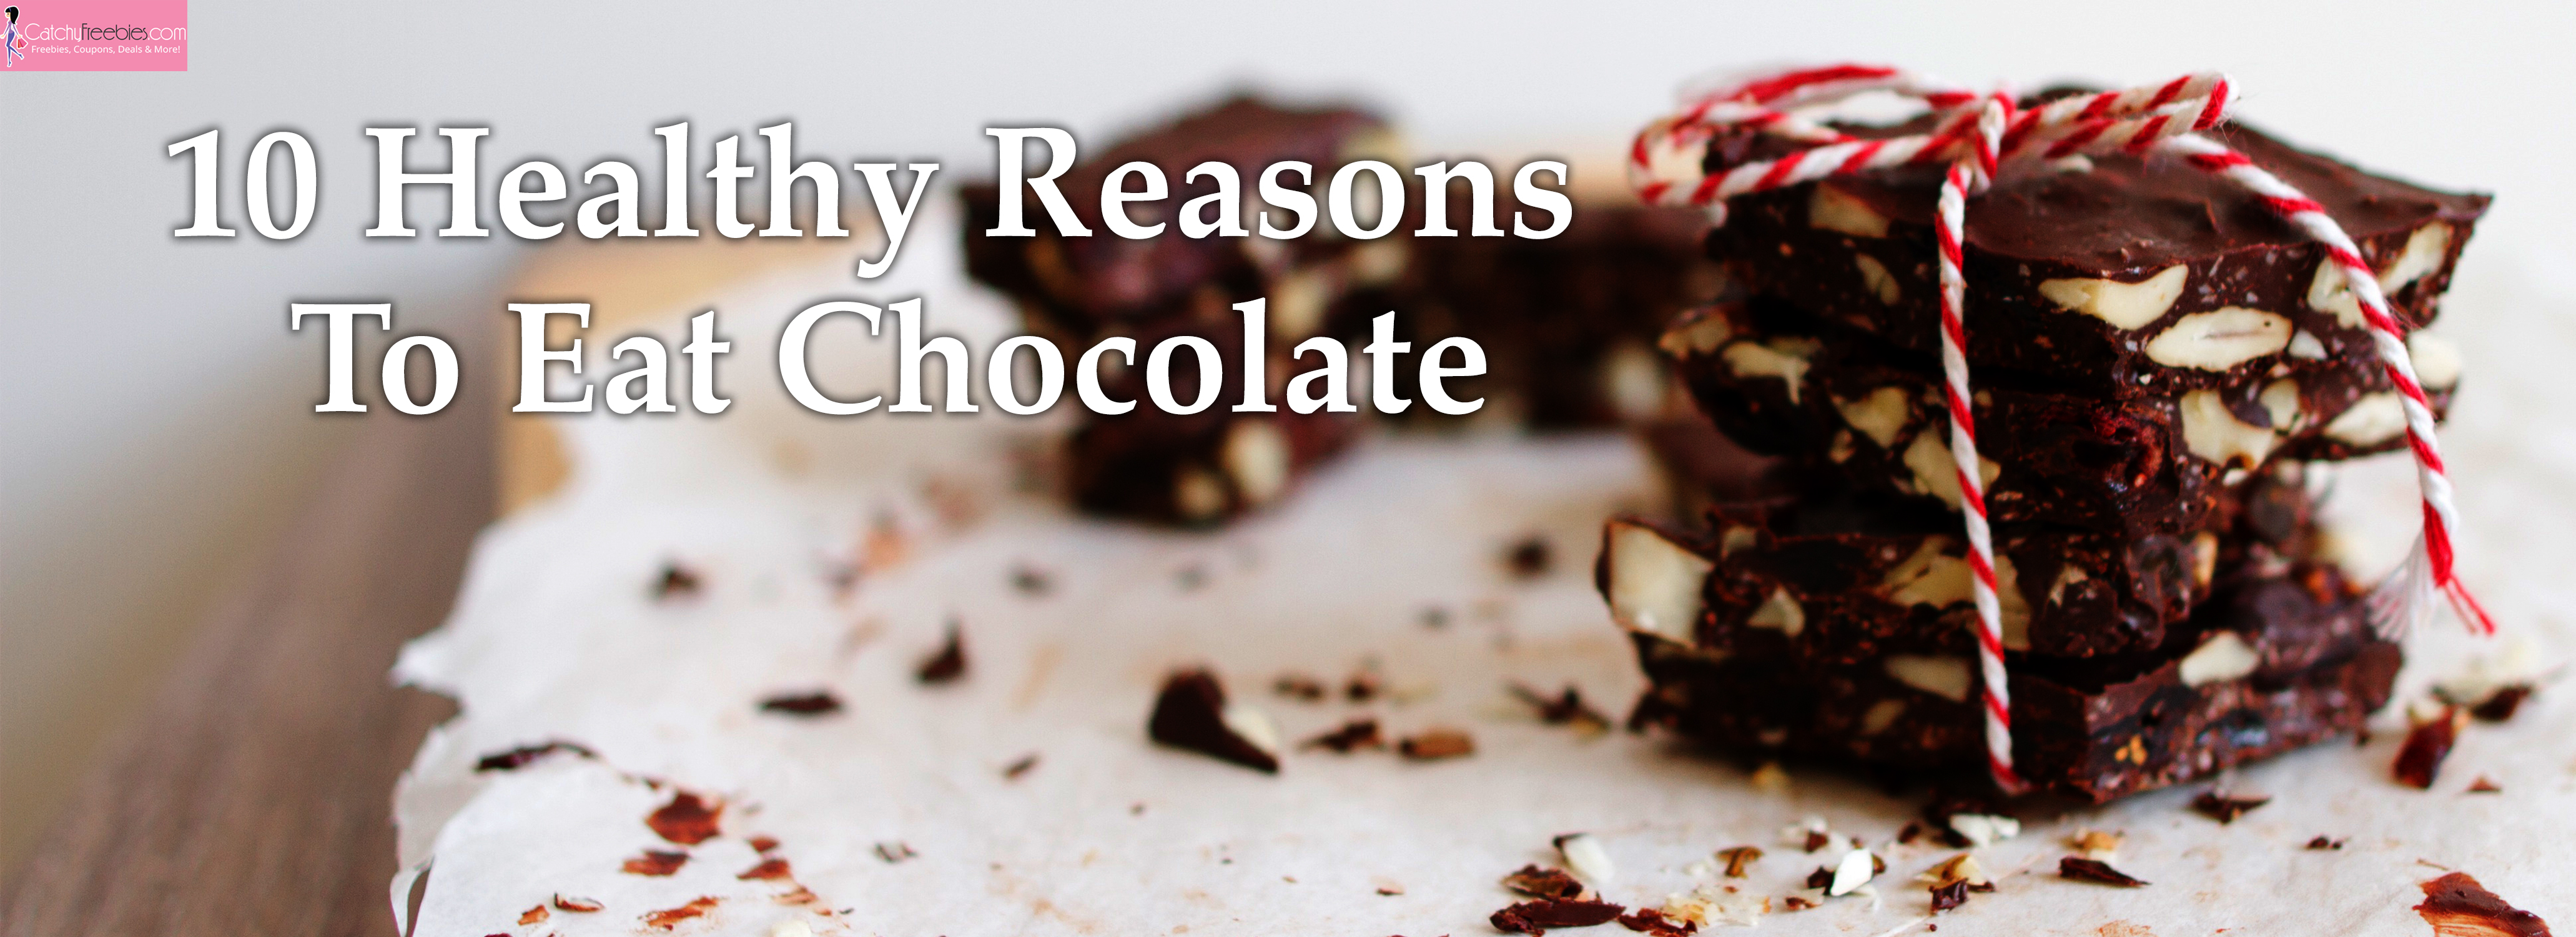 10 Healthy Reasons To Eat Chocolate